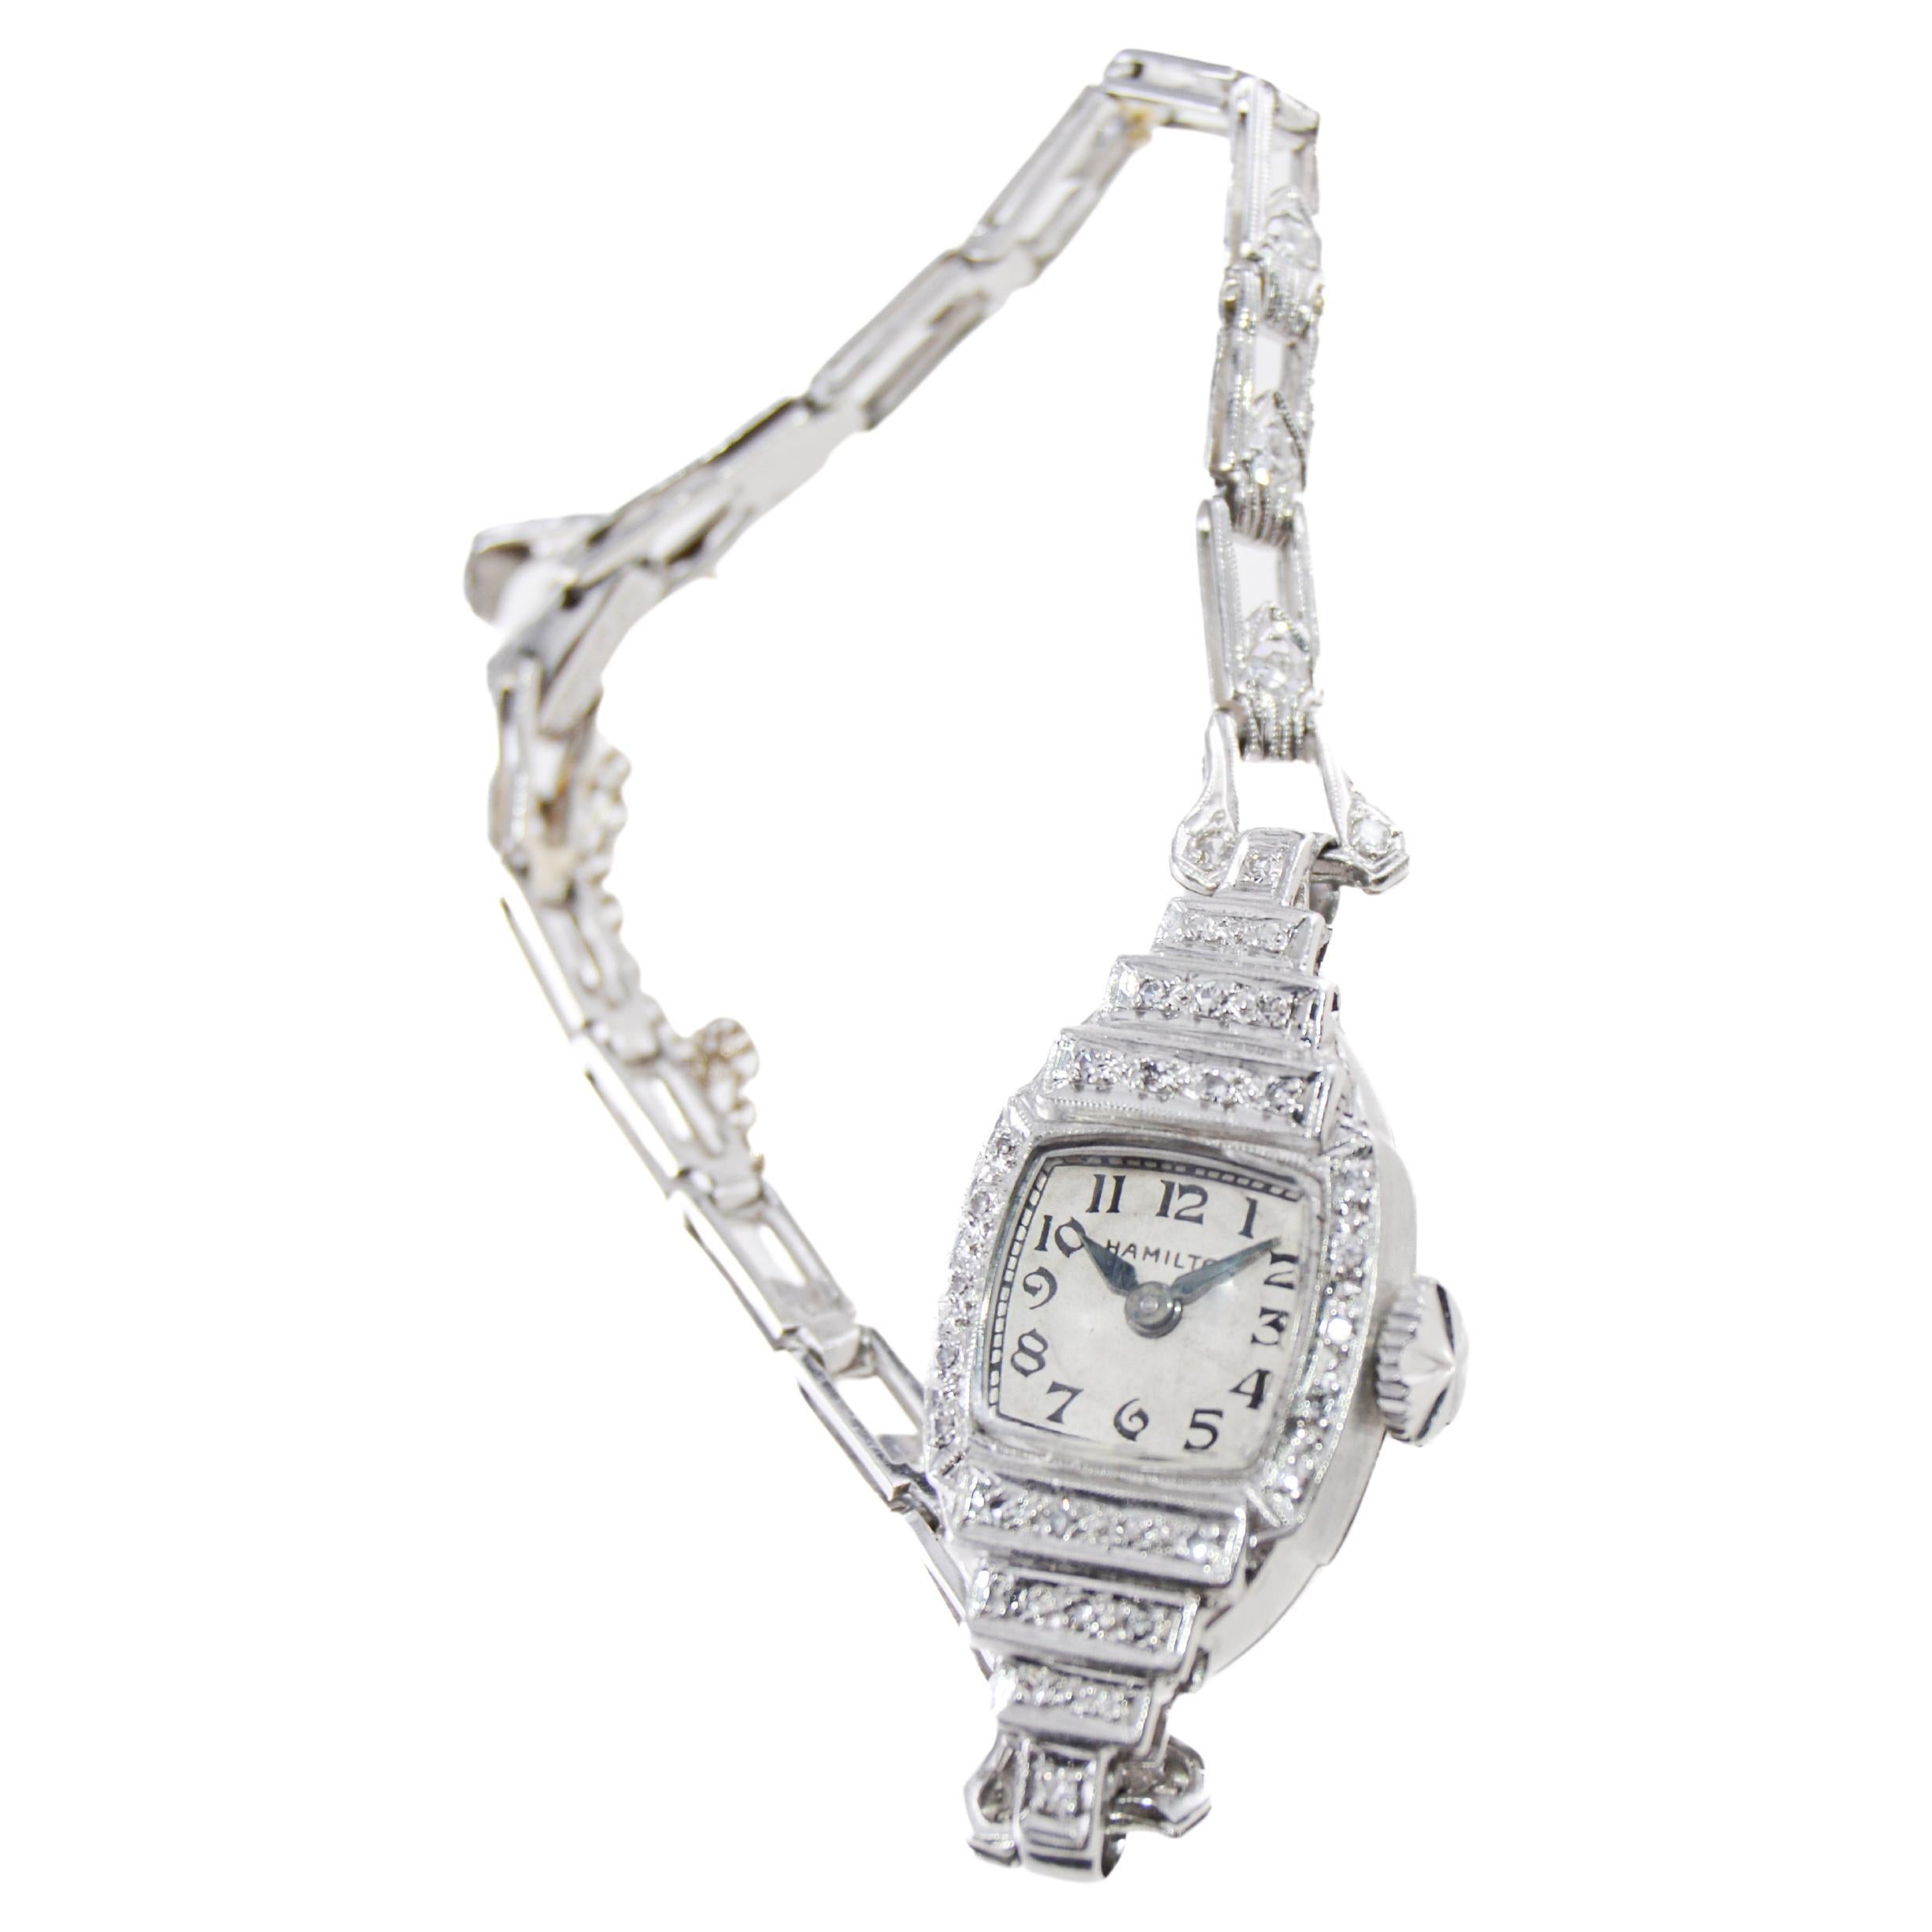 Hamilton Platinum Ladies Art Deco Styled Diamond Dress Watch, circa 1940s In Excellent Condition For Sale In Long Beach, CA